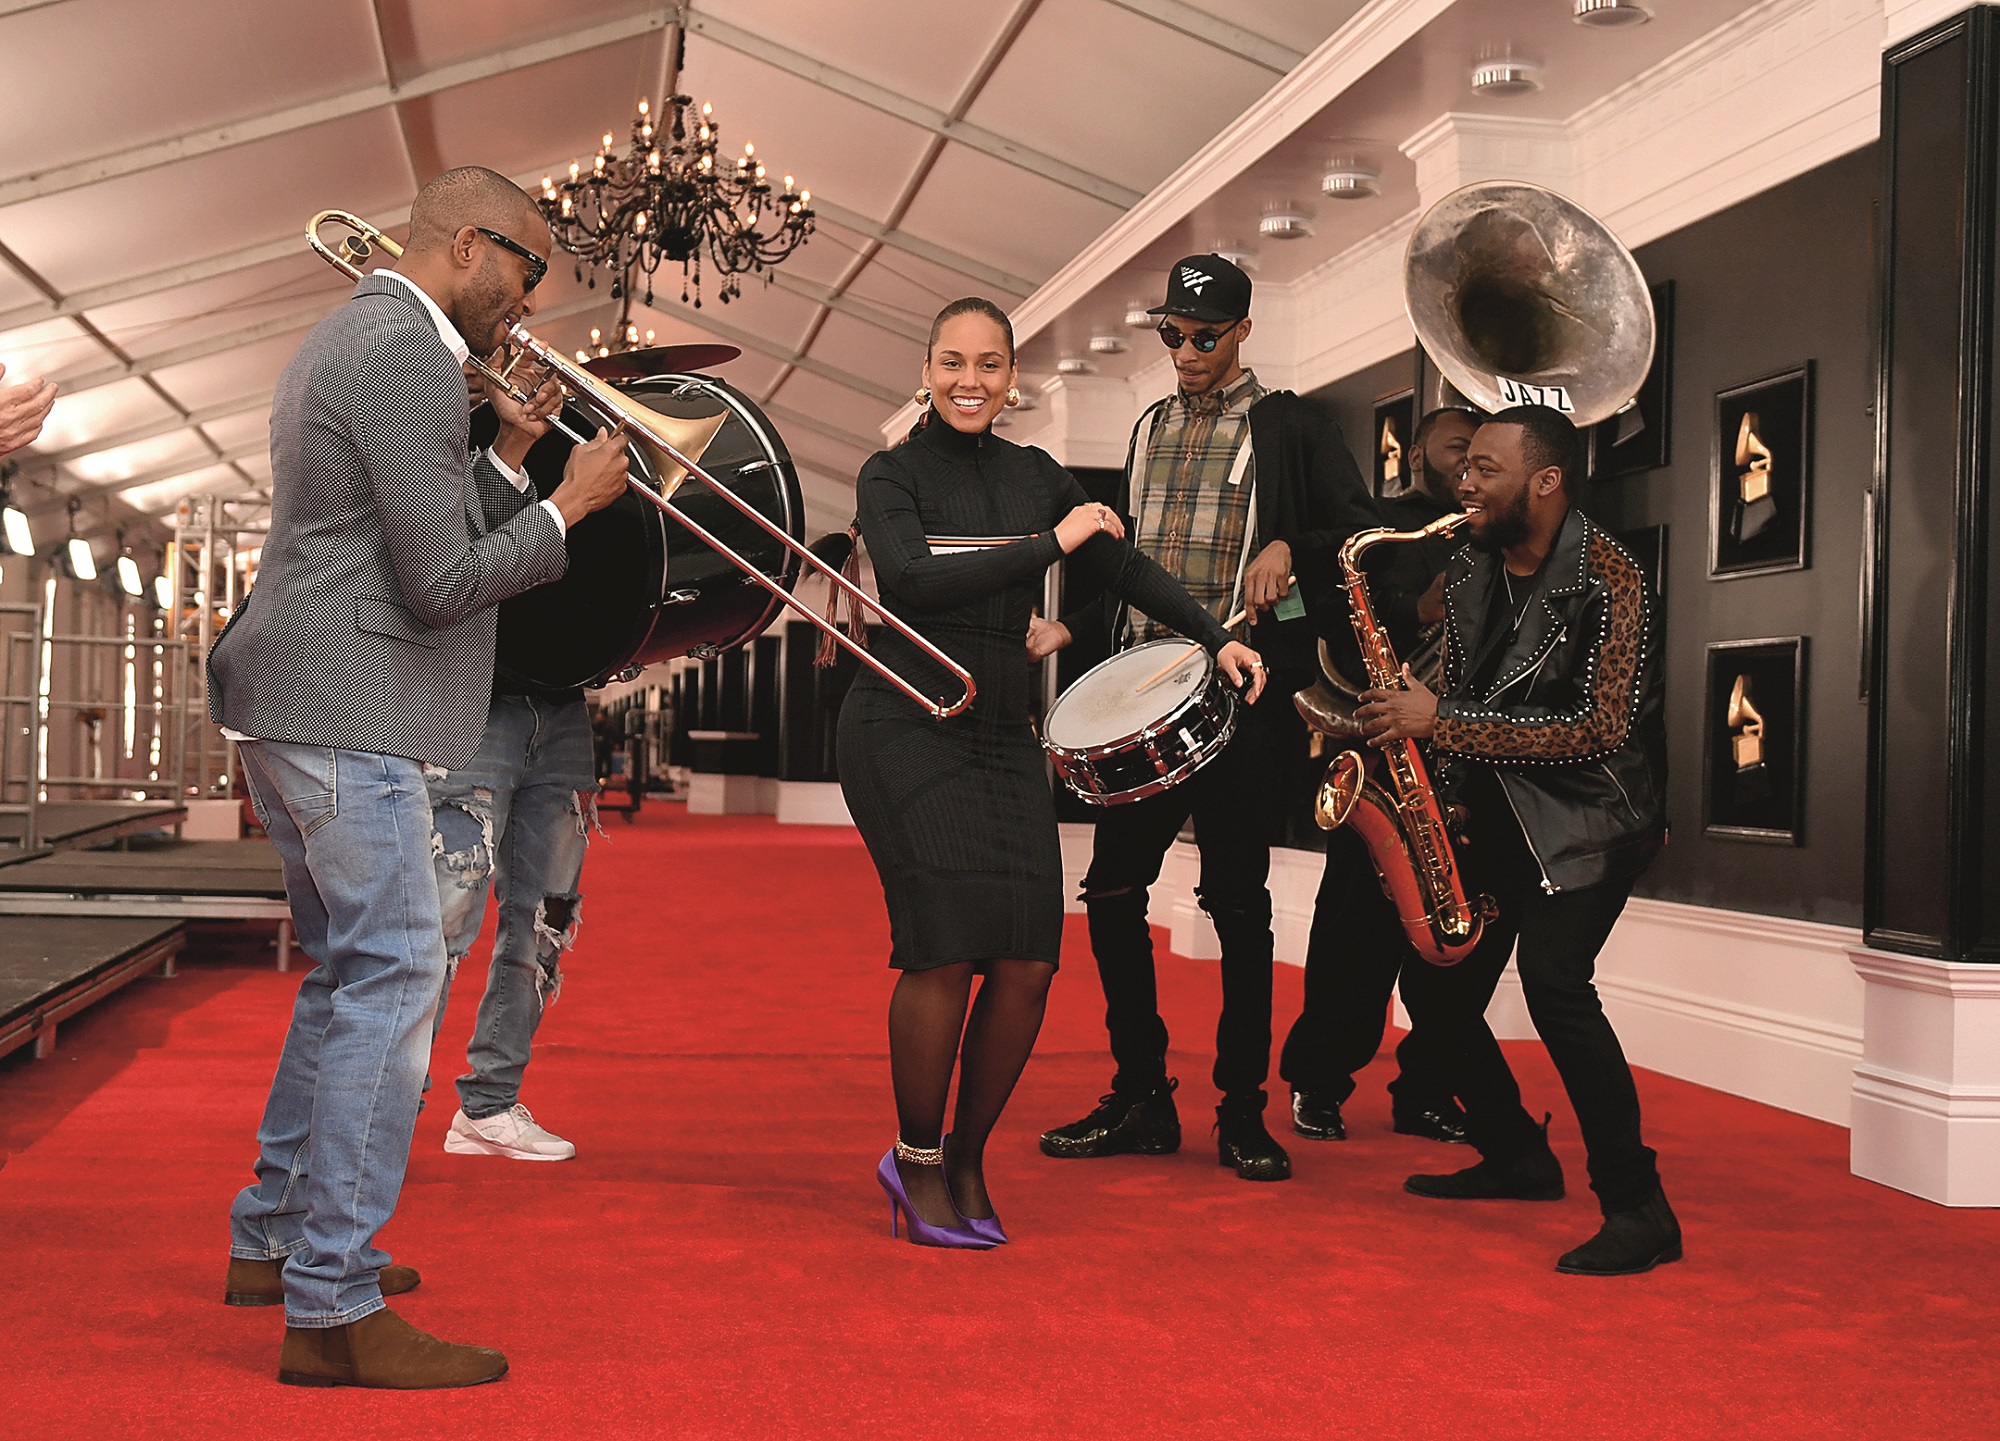 LOS ANGELES, CALIFORNIA - FEBRUARY 07: Alicia Keys, (L) Trombone Shorty and his band attend the 61st Annual GRAMMY Awards Red Carpet Roll Out and Preview Day during the 61st Annual GRAMMY Awards at Staples Center on February 07, 2019 in Los Angeles, California. (Photo by Kevin Winter/Getty Images for The Recording Academy)